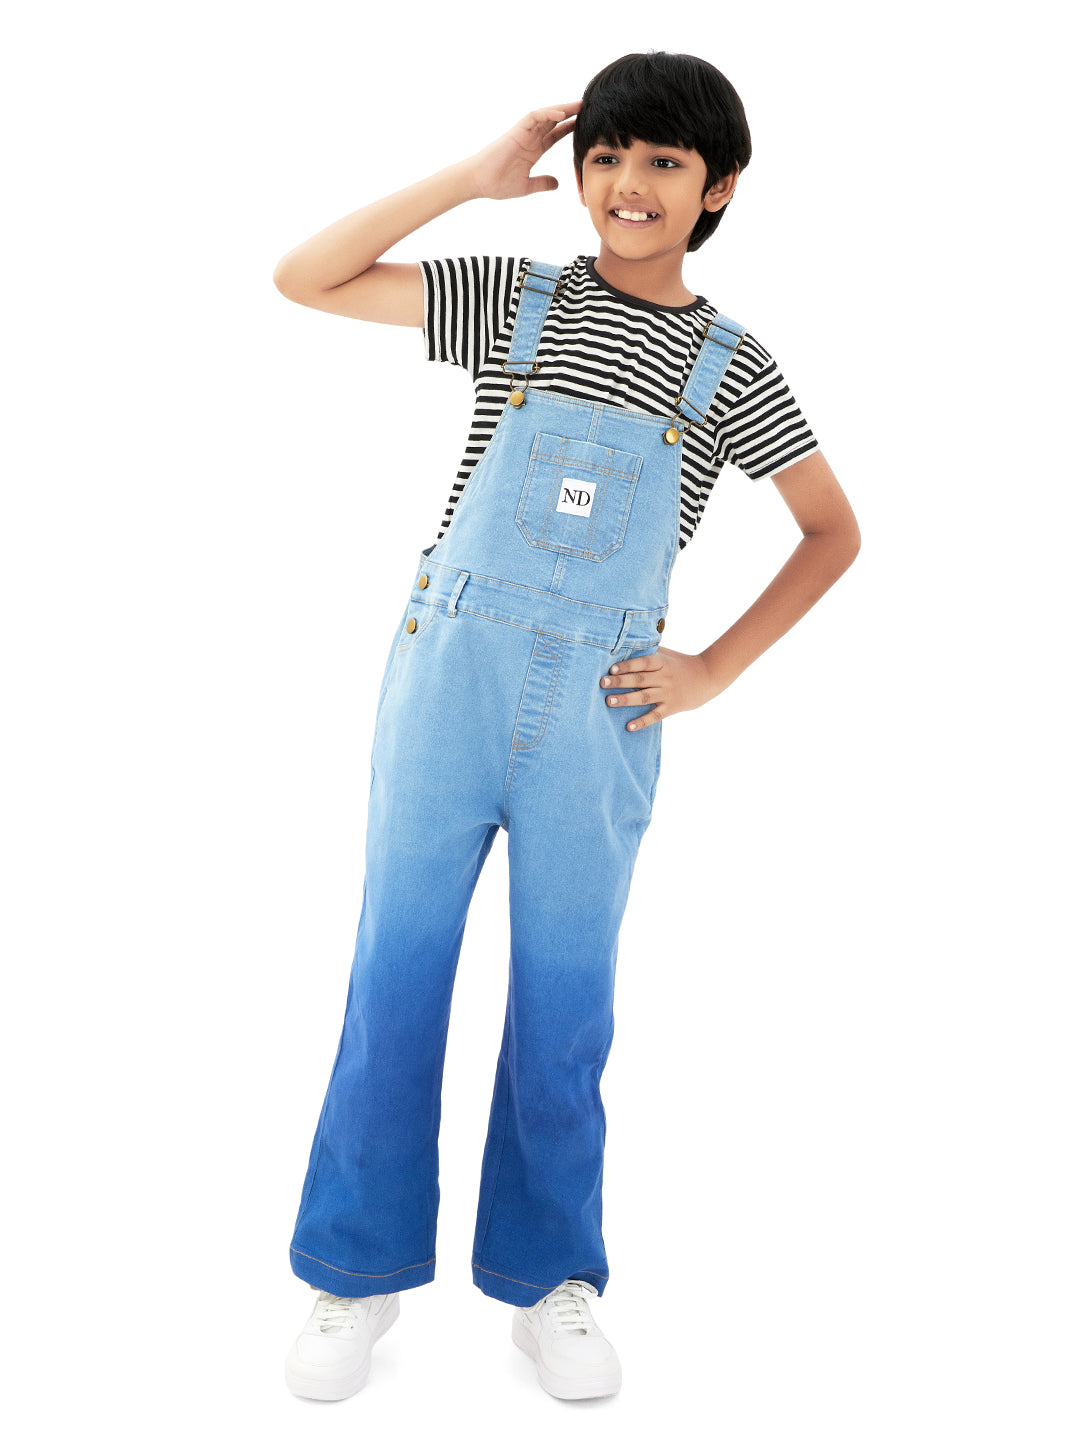 Naughty Dungaree® Full Length Ombre Bio Washed Cotton Denim Dungaree - Boys